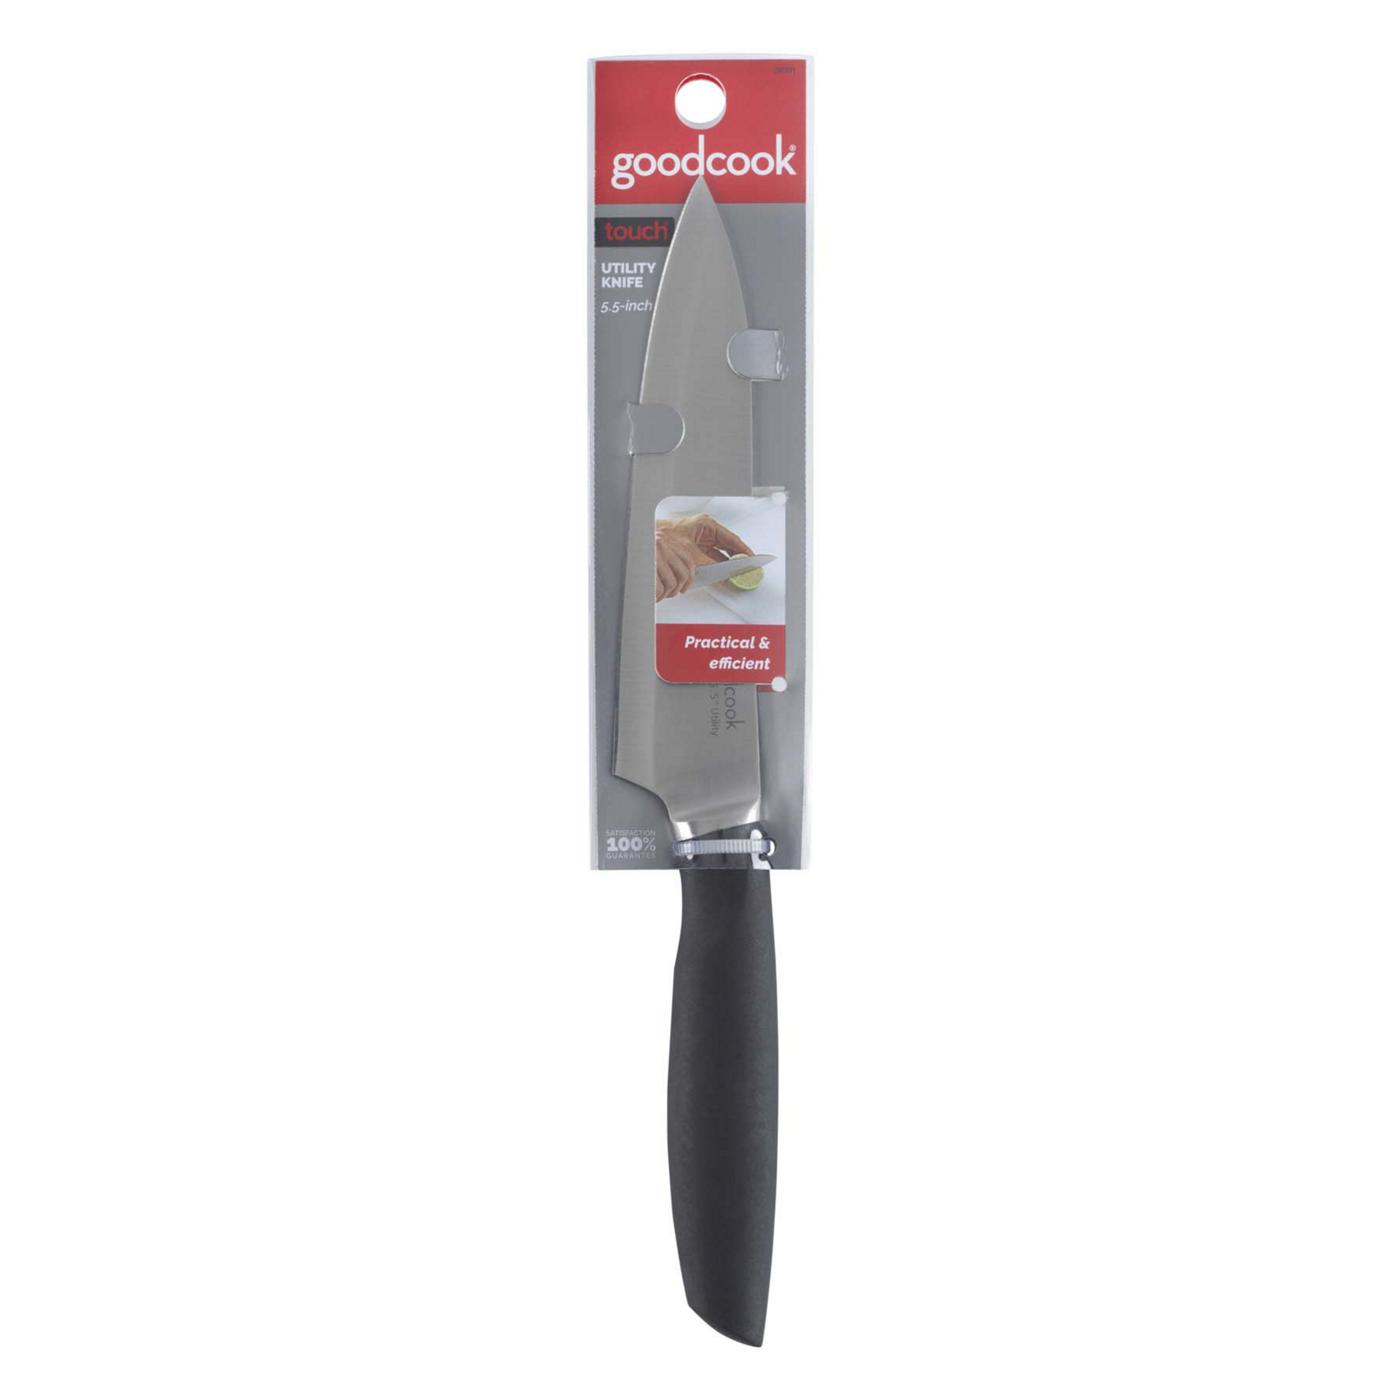 GoodCook Touch Utility Knife; image 1 of 3